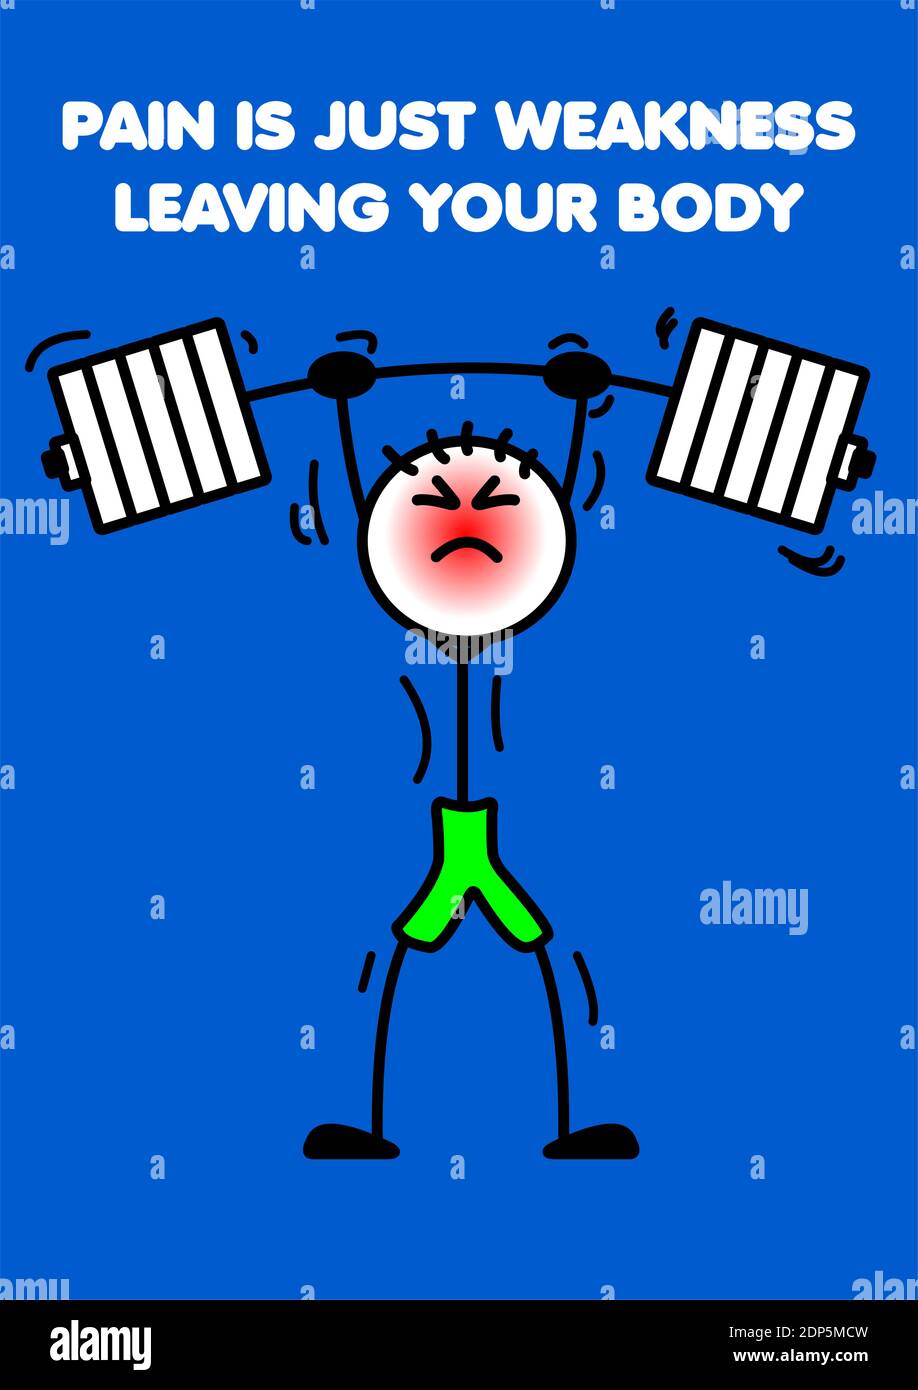 Gym motivation poster from stickmen series 'PAIN IS JUST WEAKNESS LEAVING YOUR BODY' Stock Vector